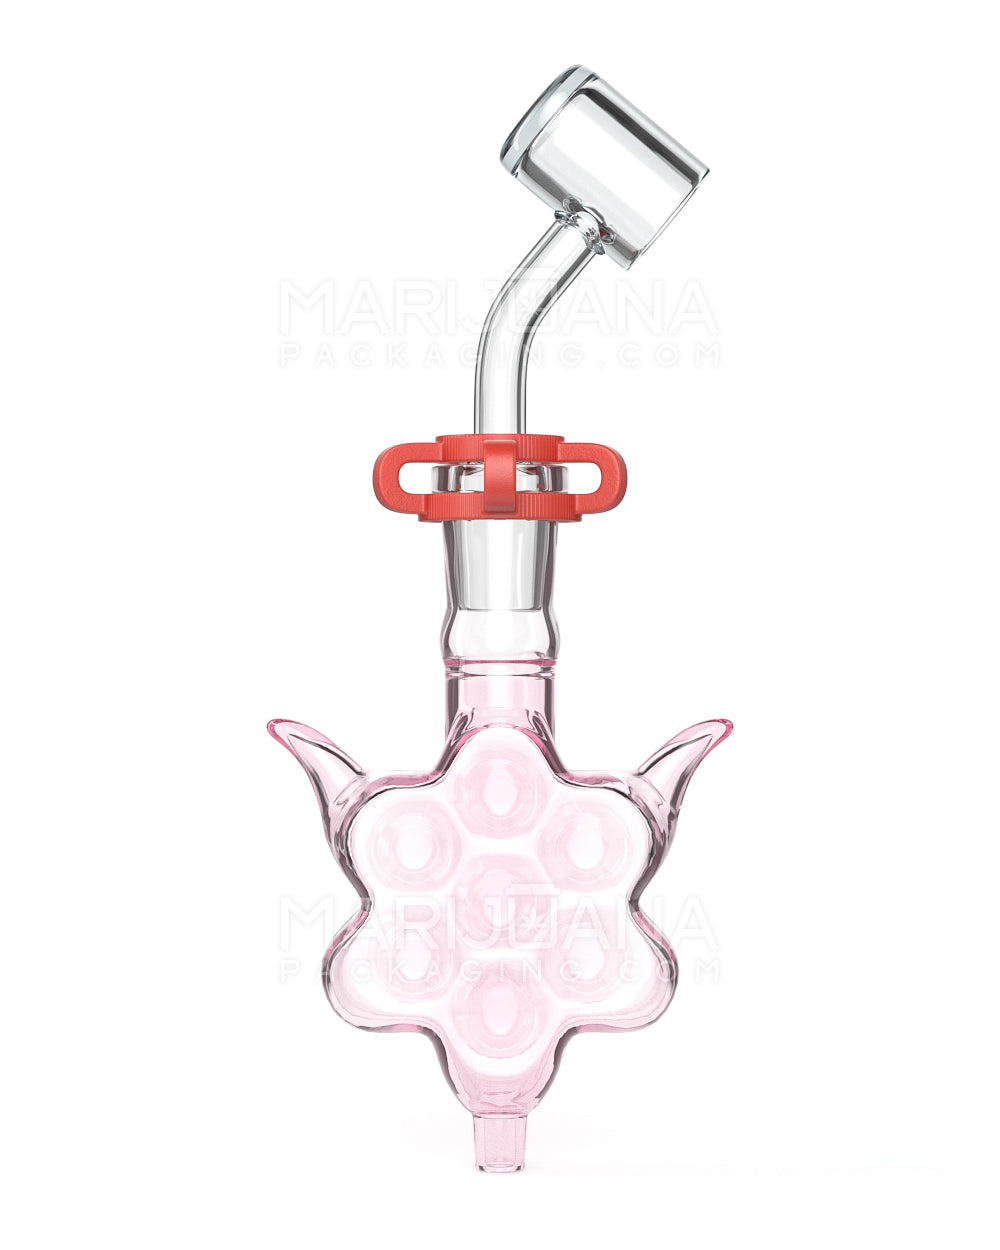 Horned Honeycomb Glass Nectar Collector w/ Banger Nail | 4in Long - 14mm Attachment - Pink - 1